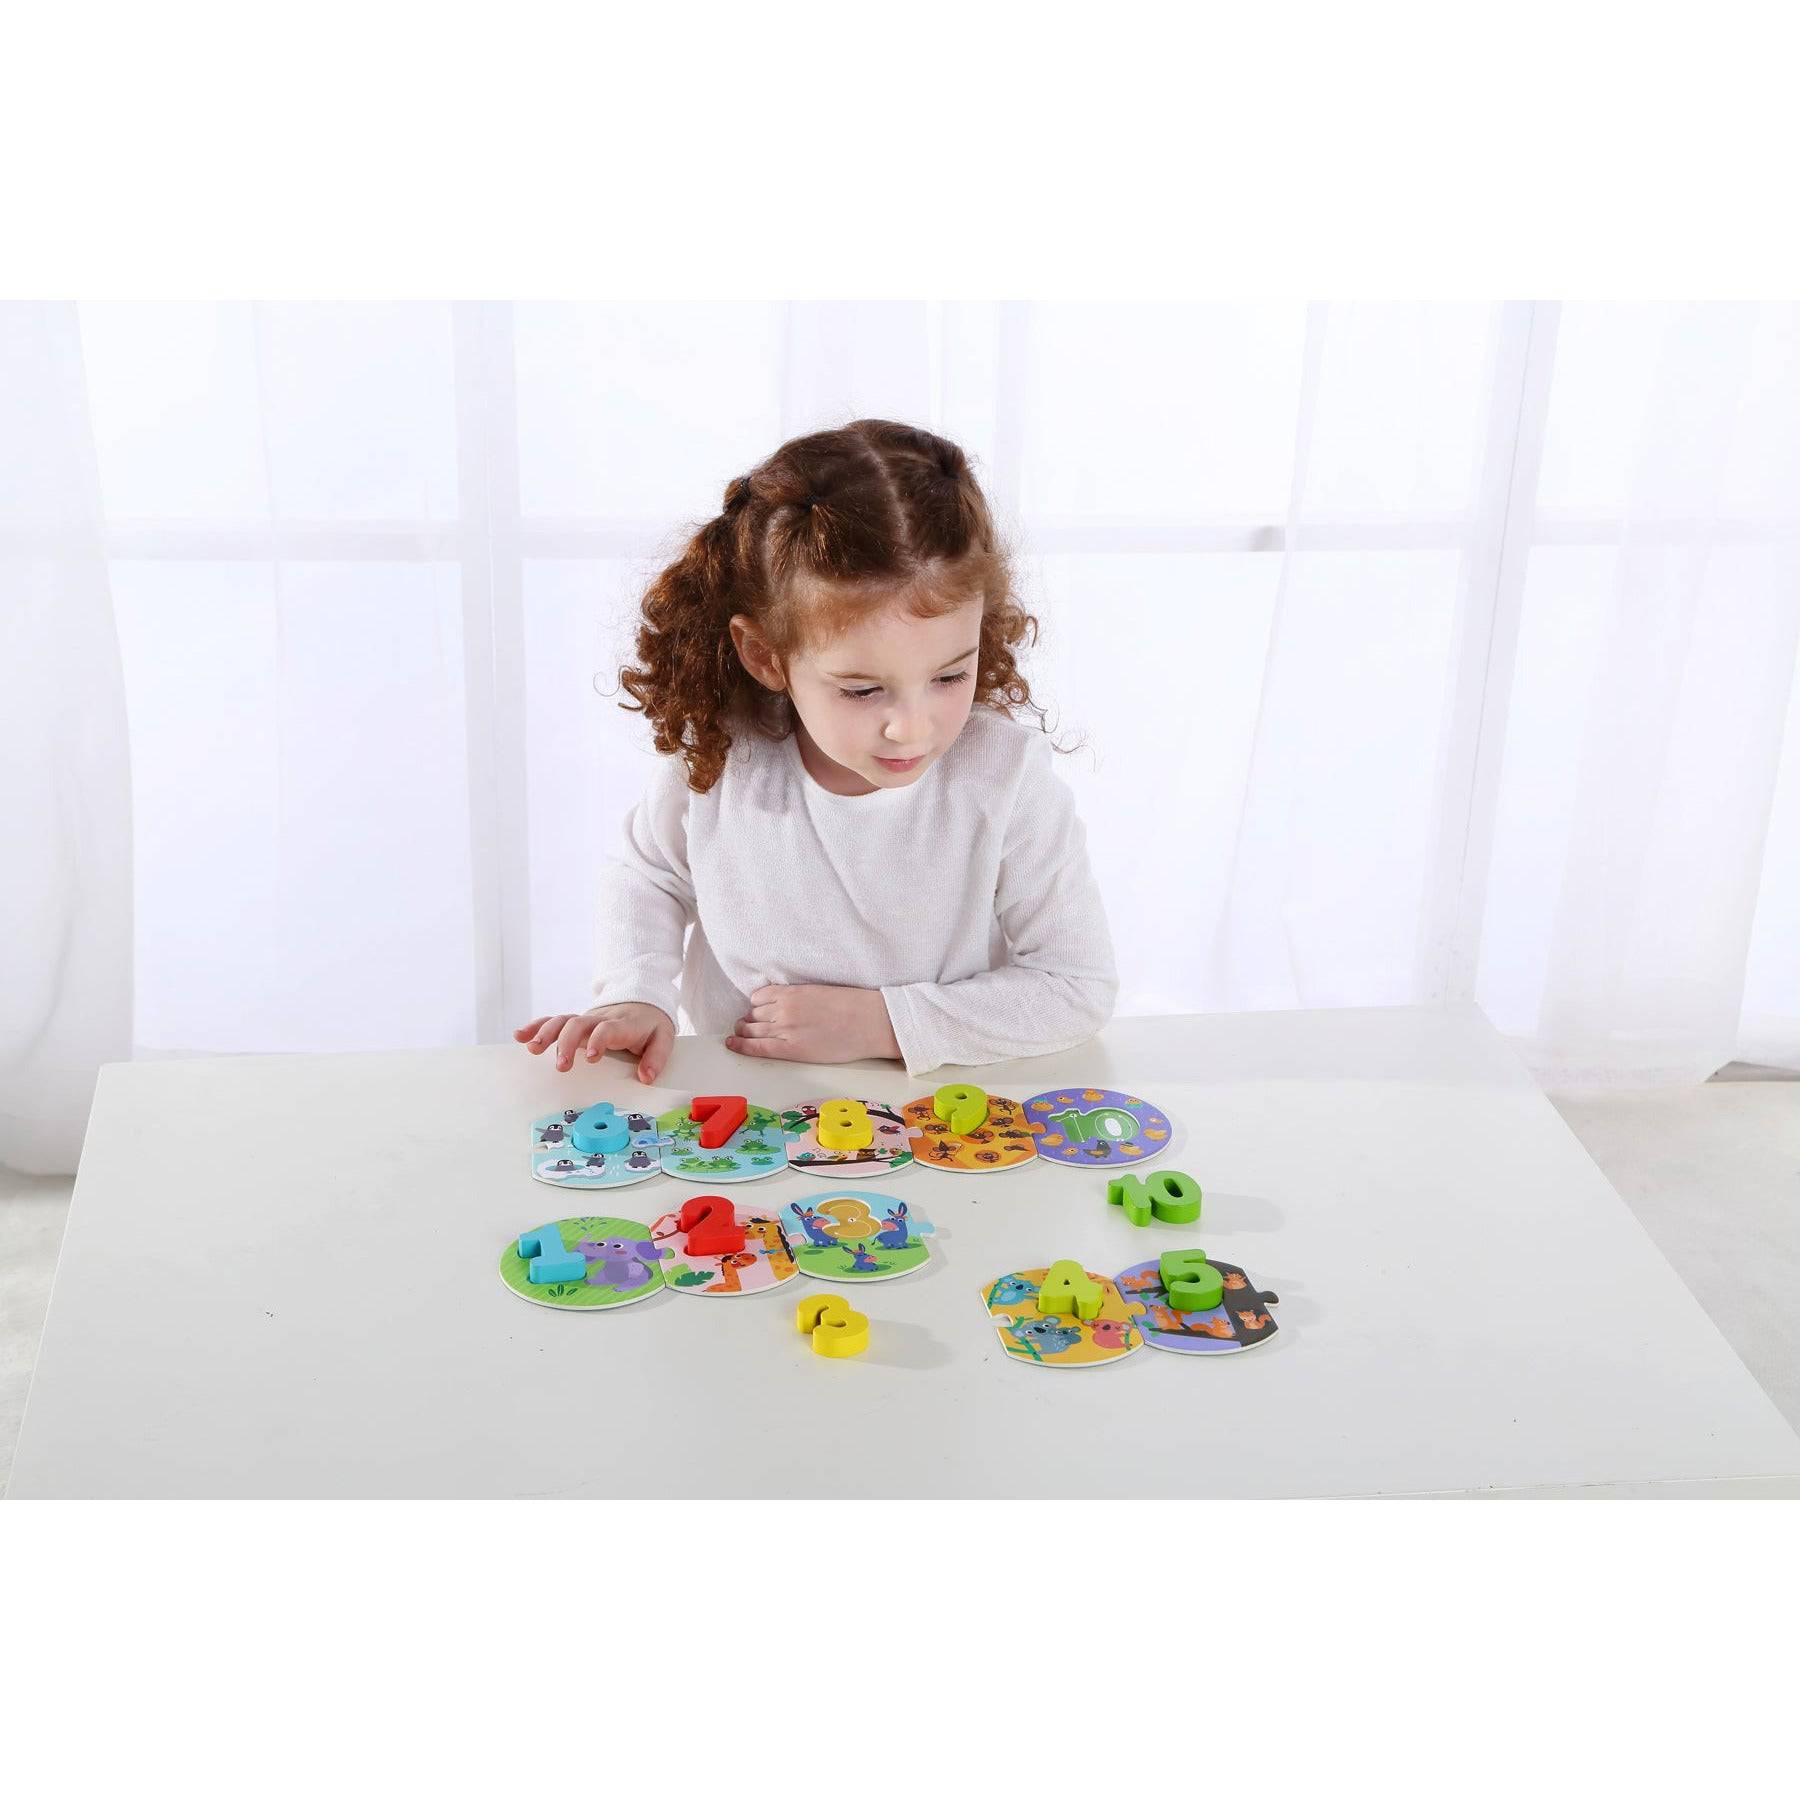 Number Puzzle In Carry Box - Sensory Circle